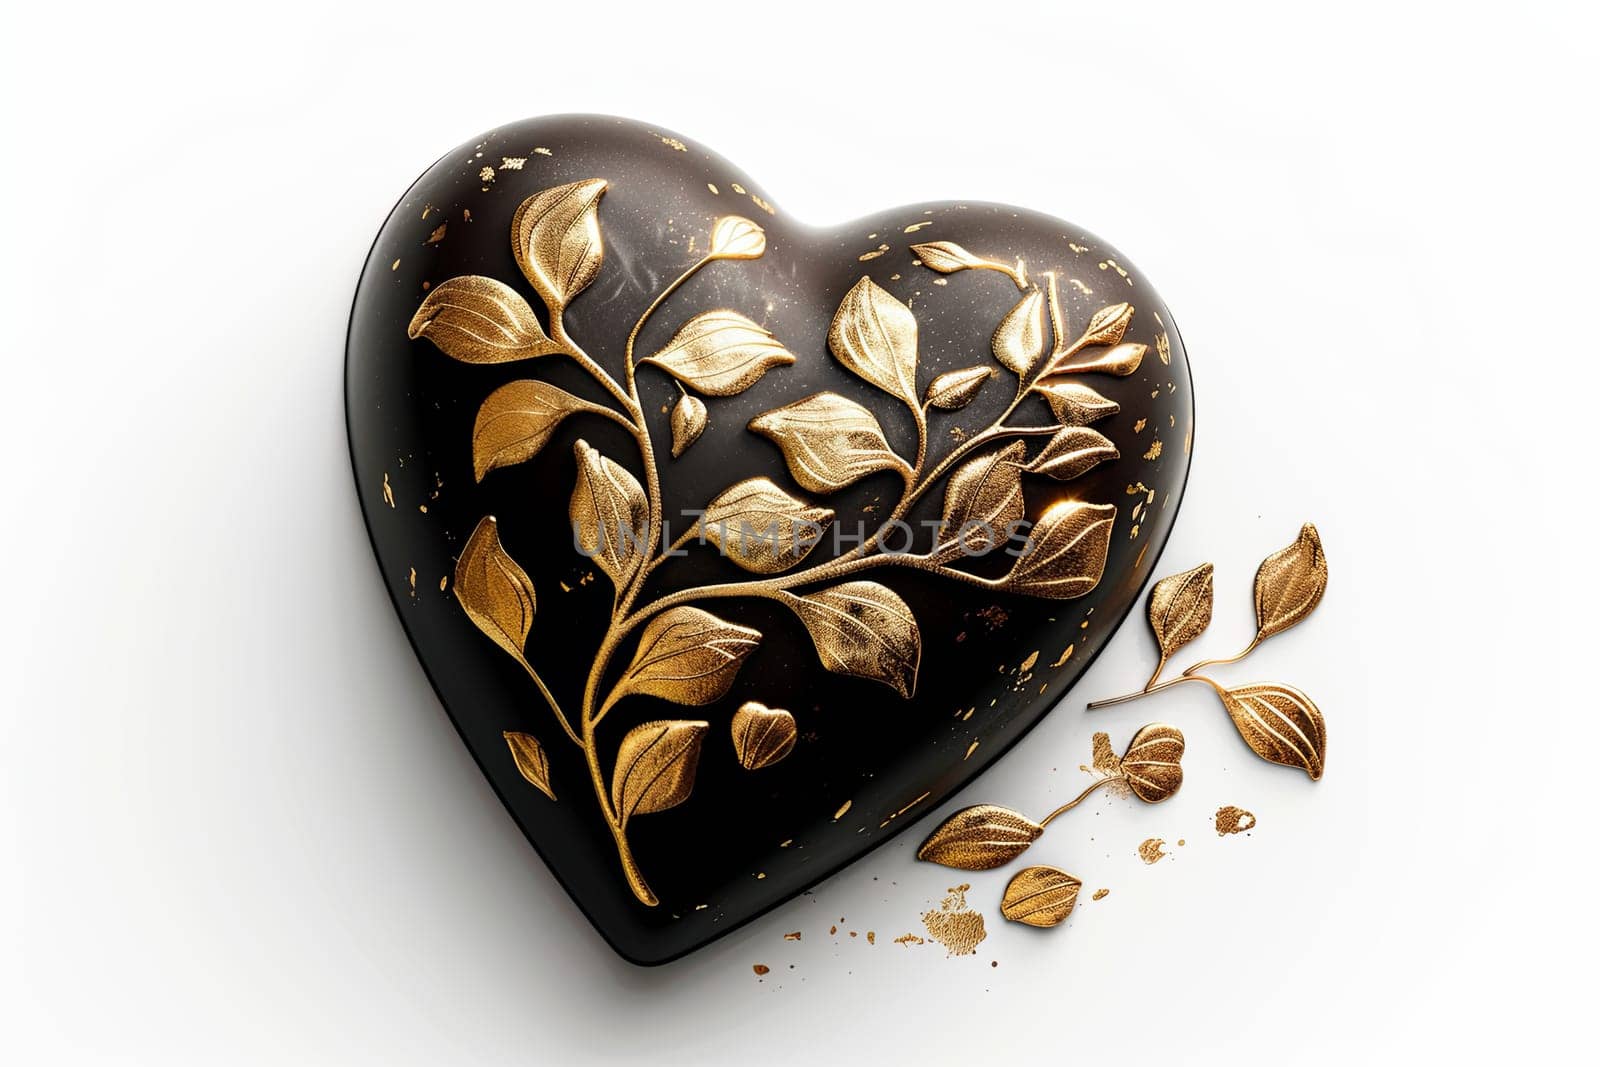 A chocolate heart-shaped box embellished with intricate gold leaves on a white background, creating an elegant and romantic look.